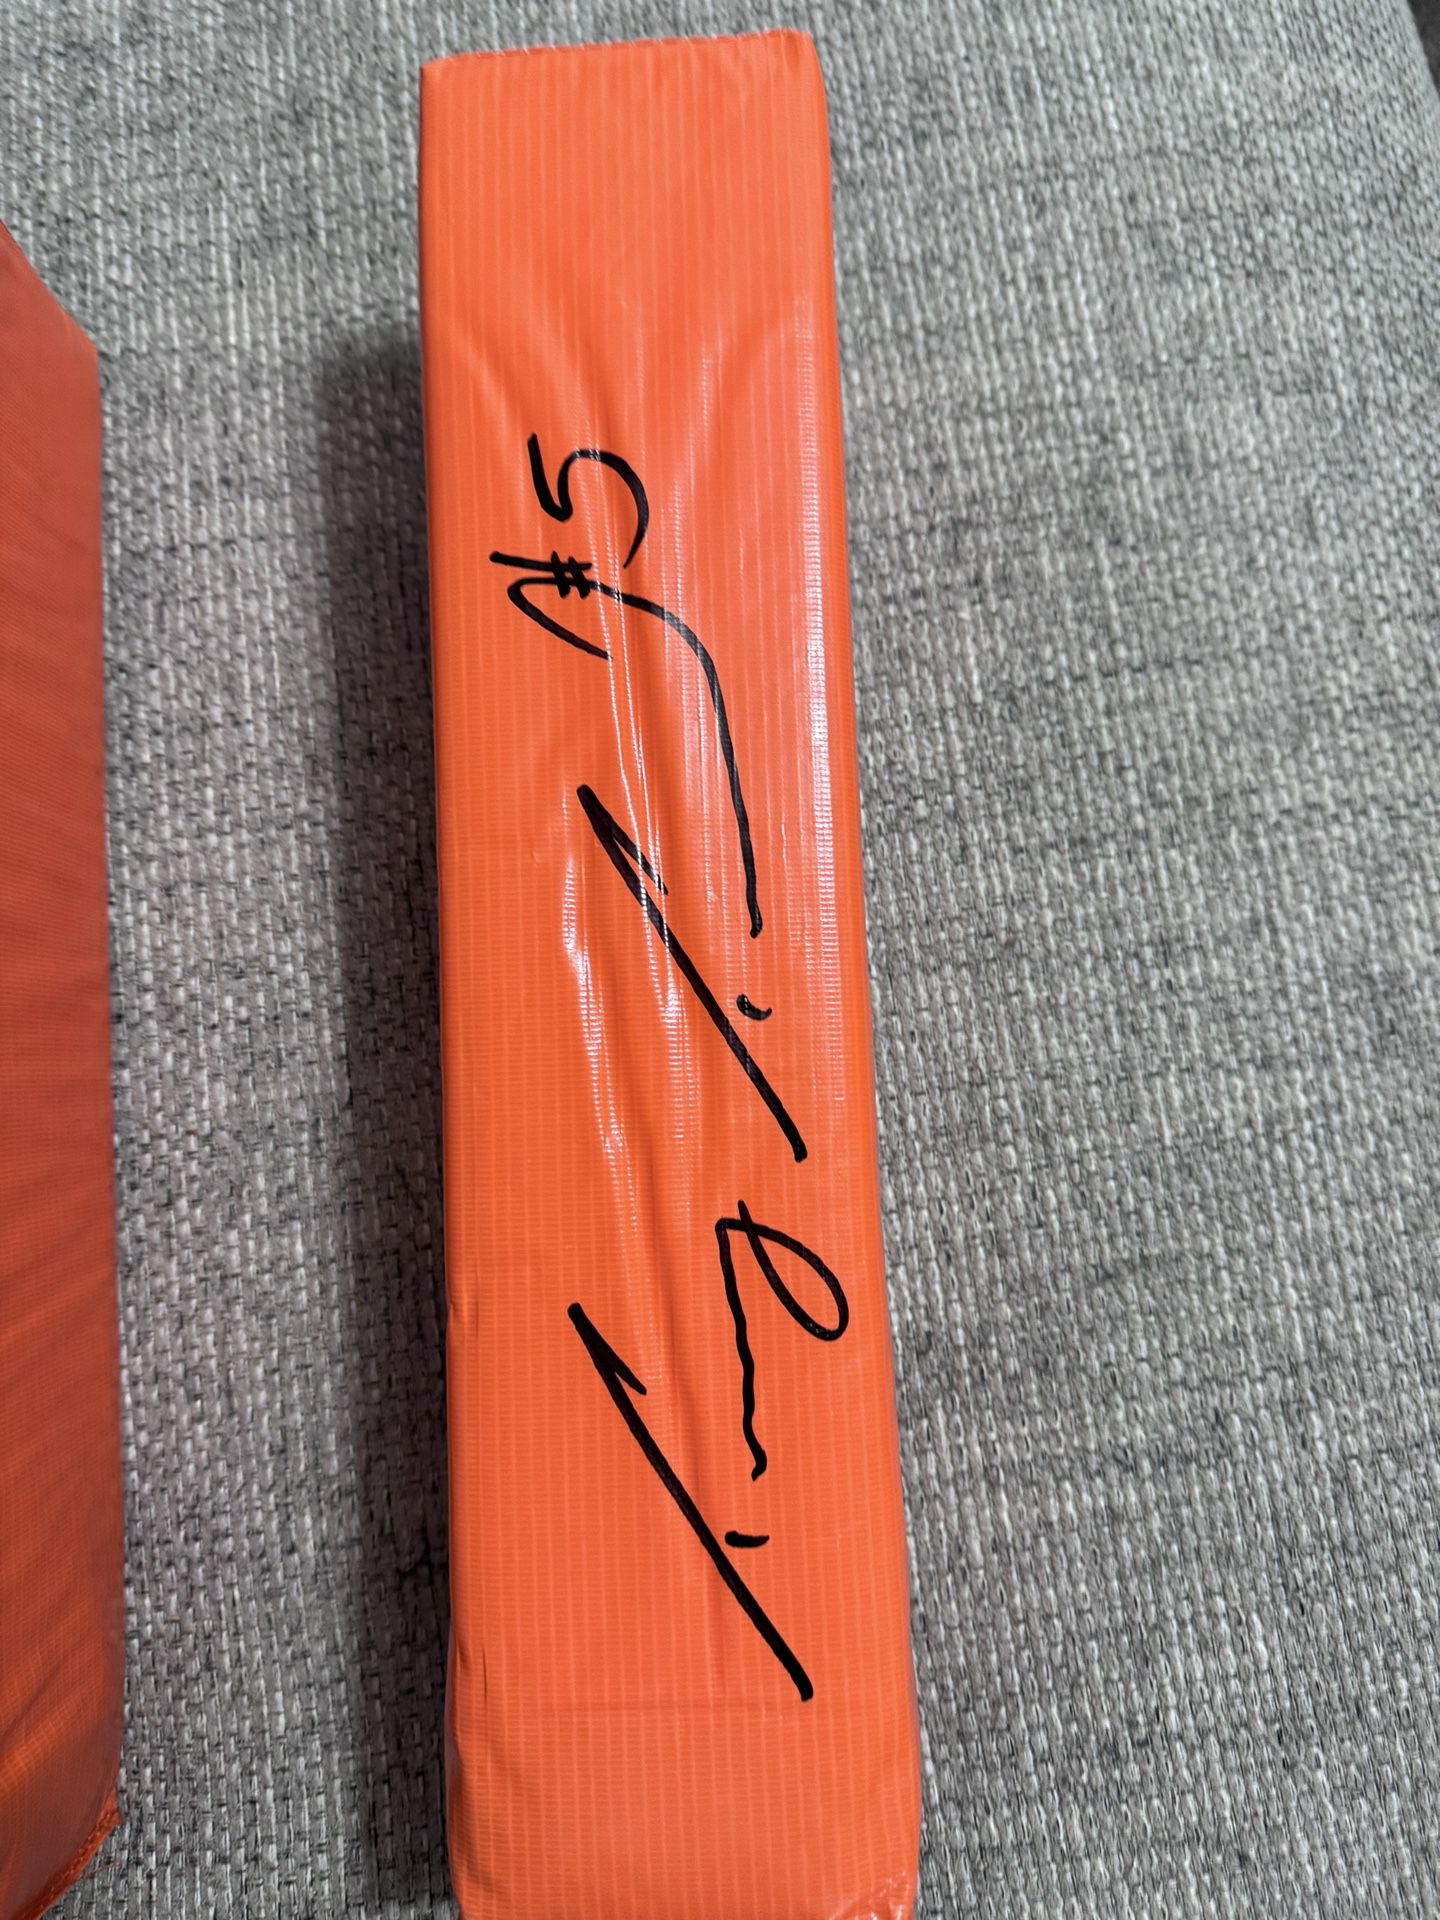 Tommy Townsend Signed Autograph End Zone Pylon - Beckett Witness Coa